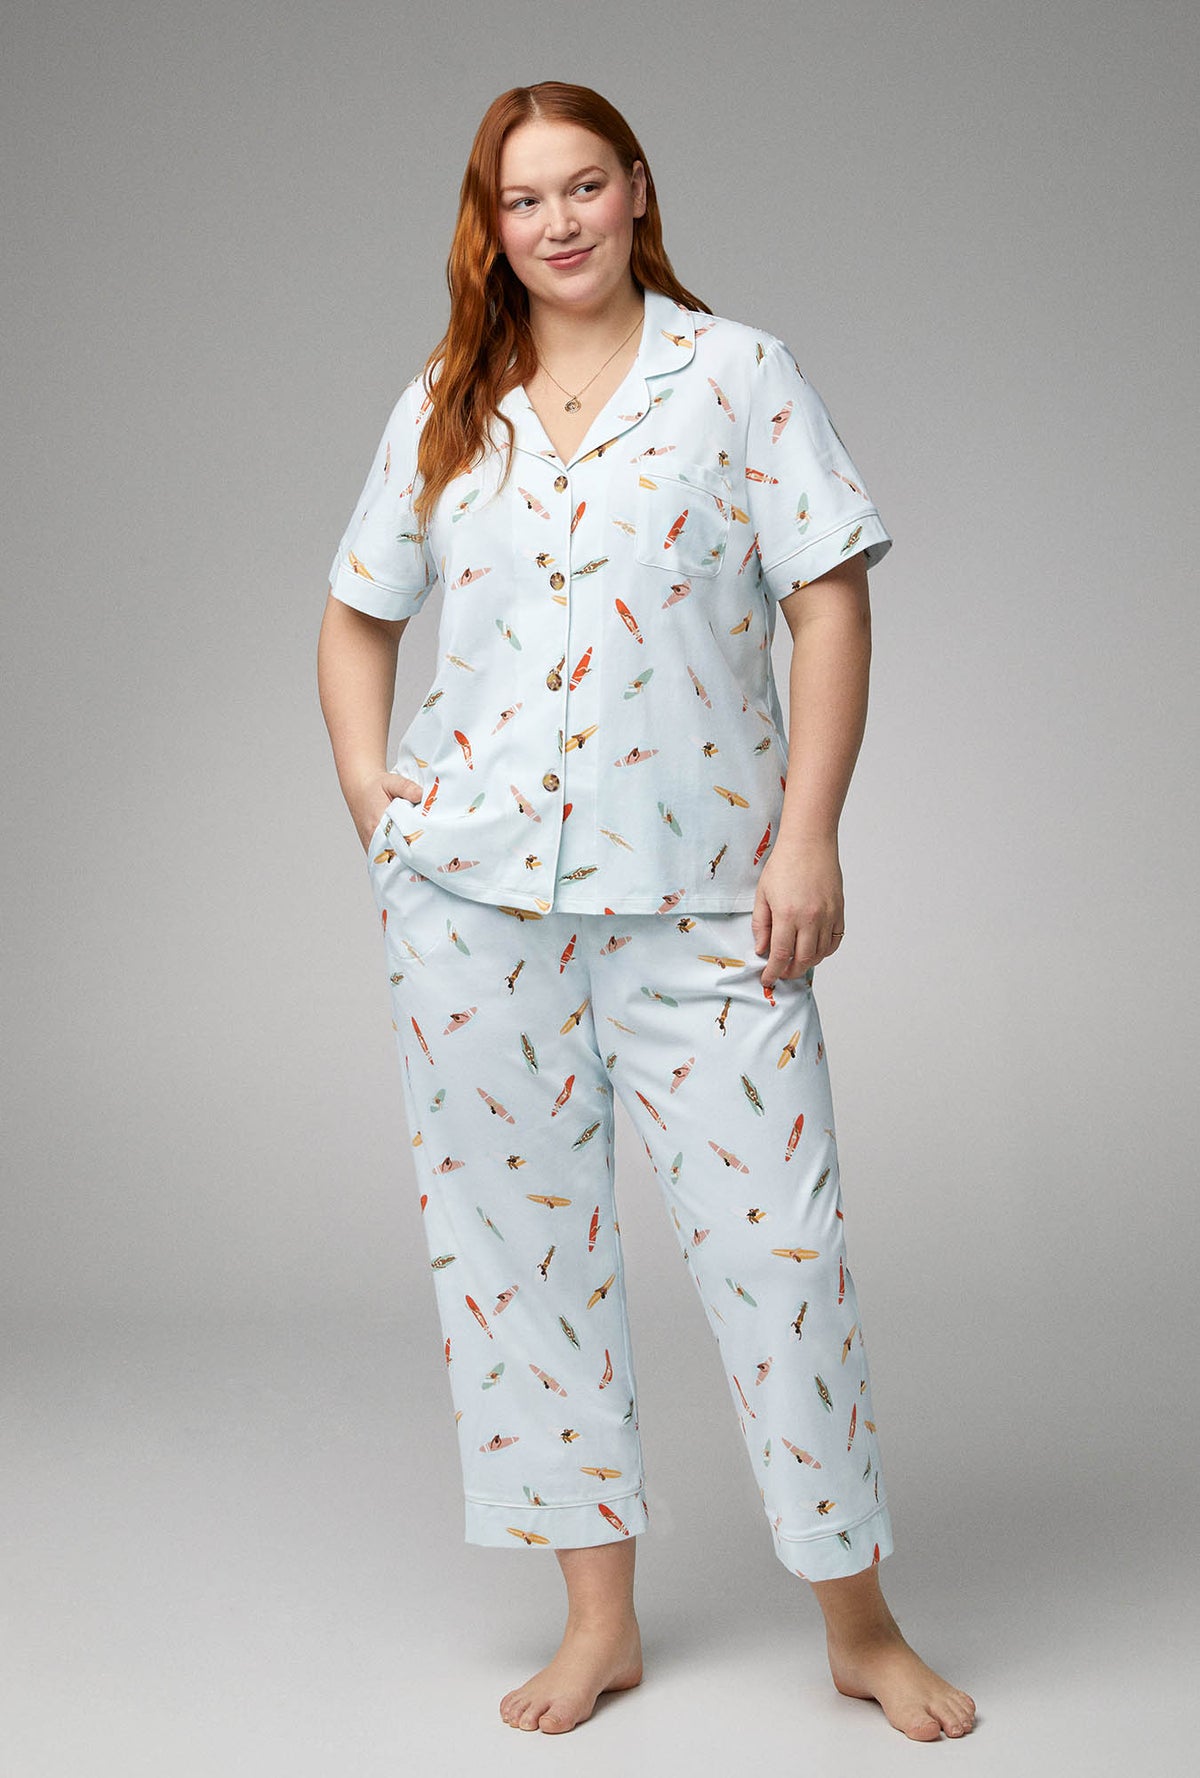 A lady wearing white short sleeve classic stretch jersey plus size pj set with retro surf print.